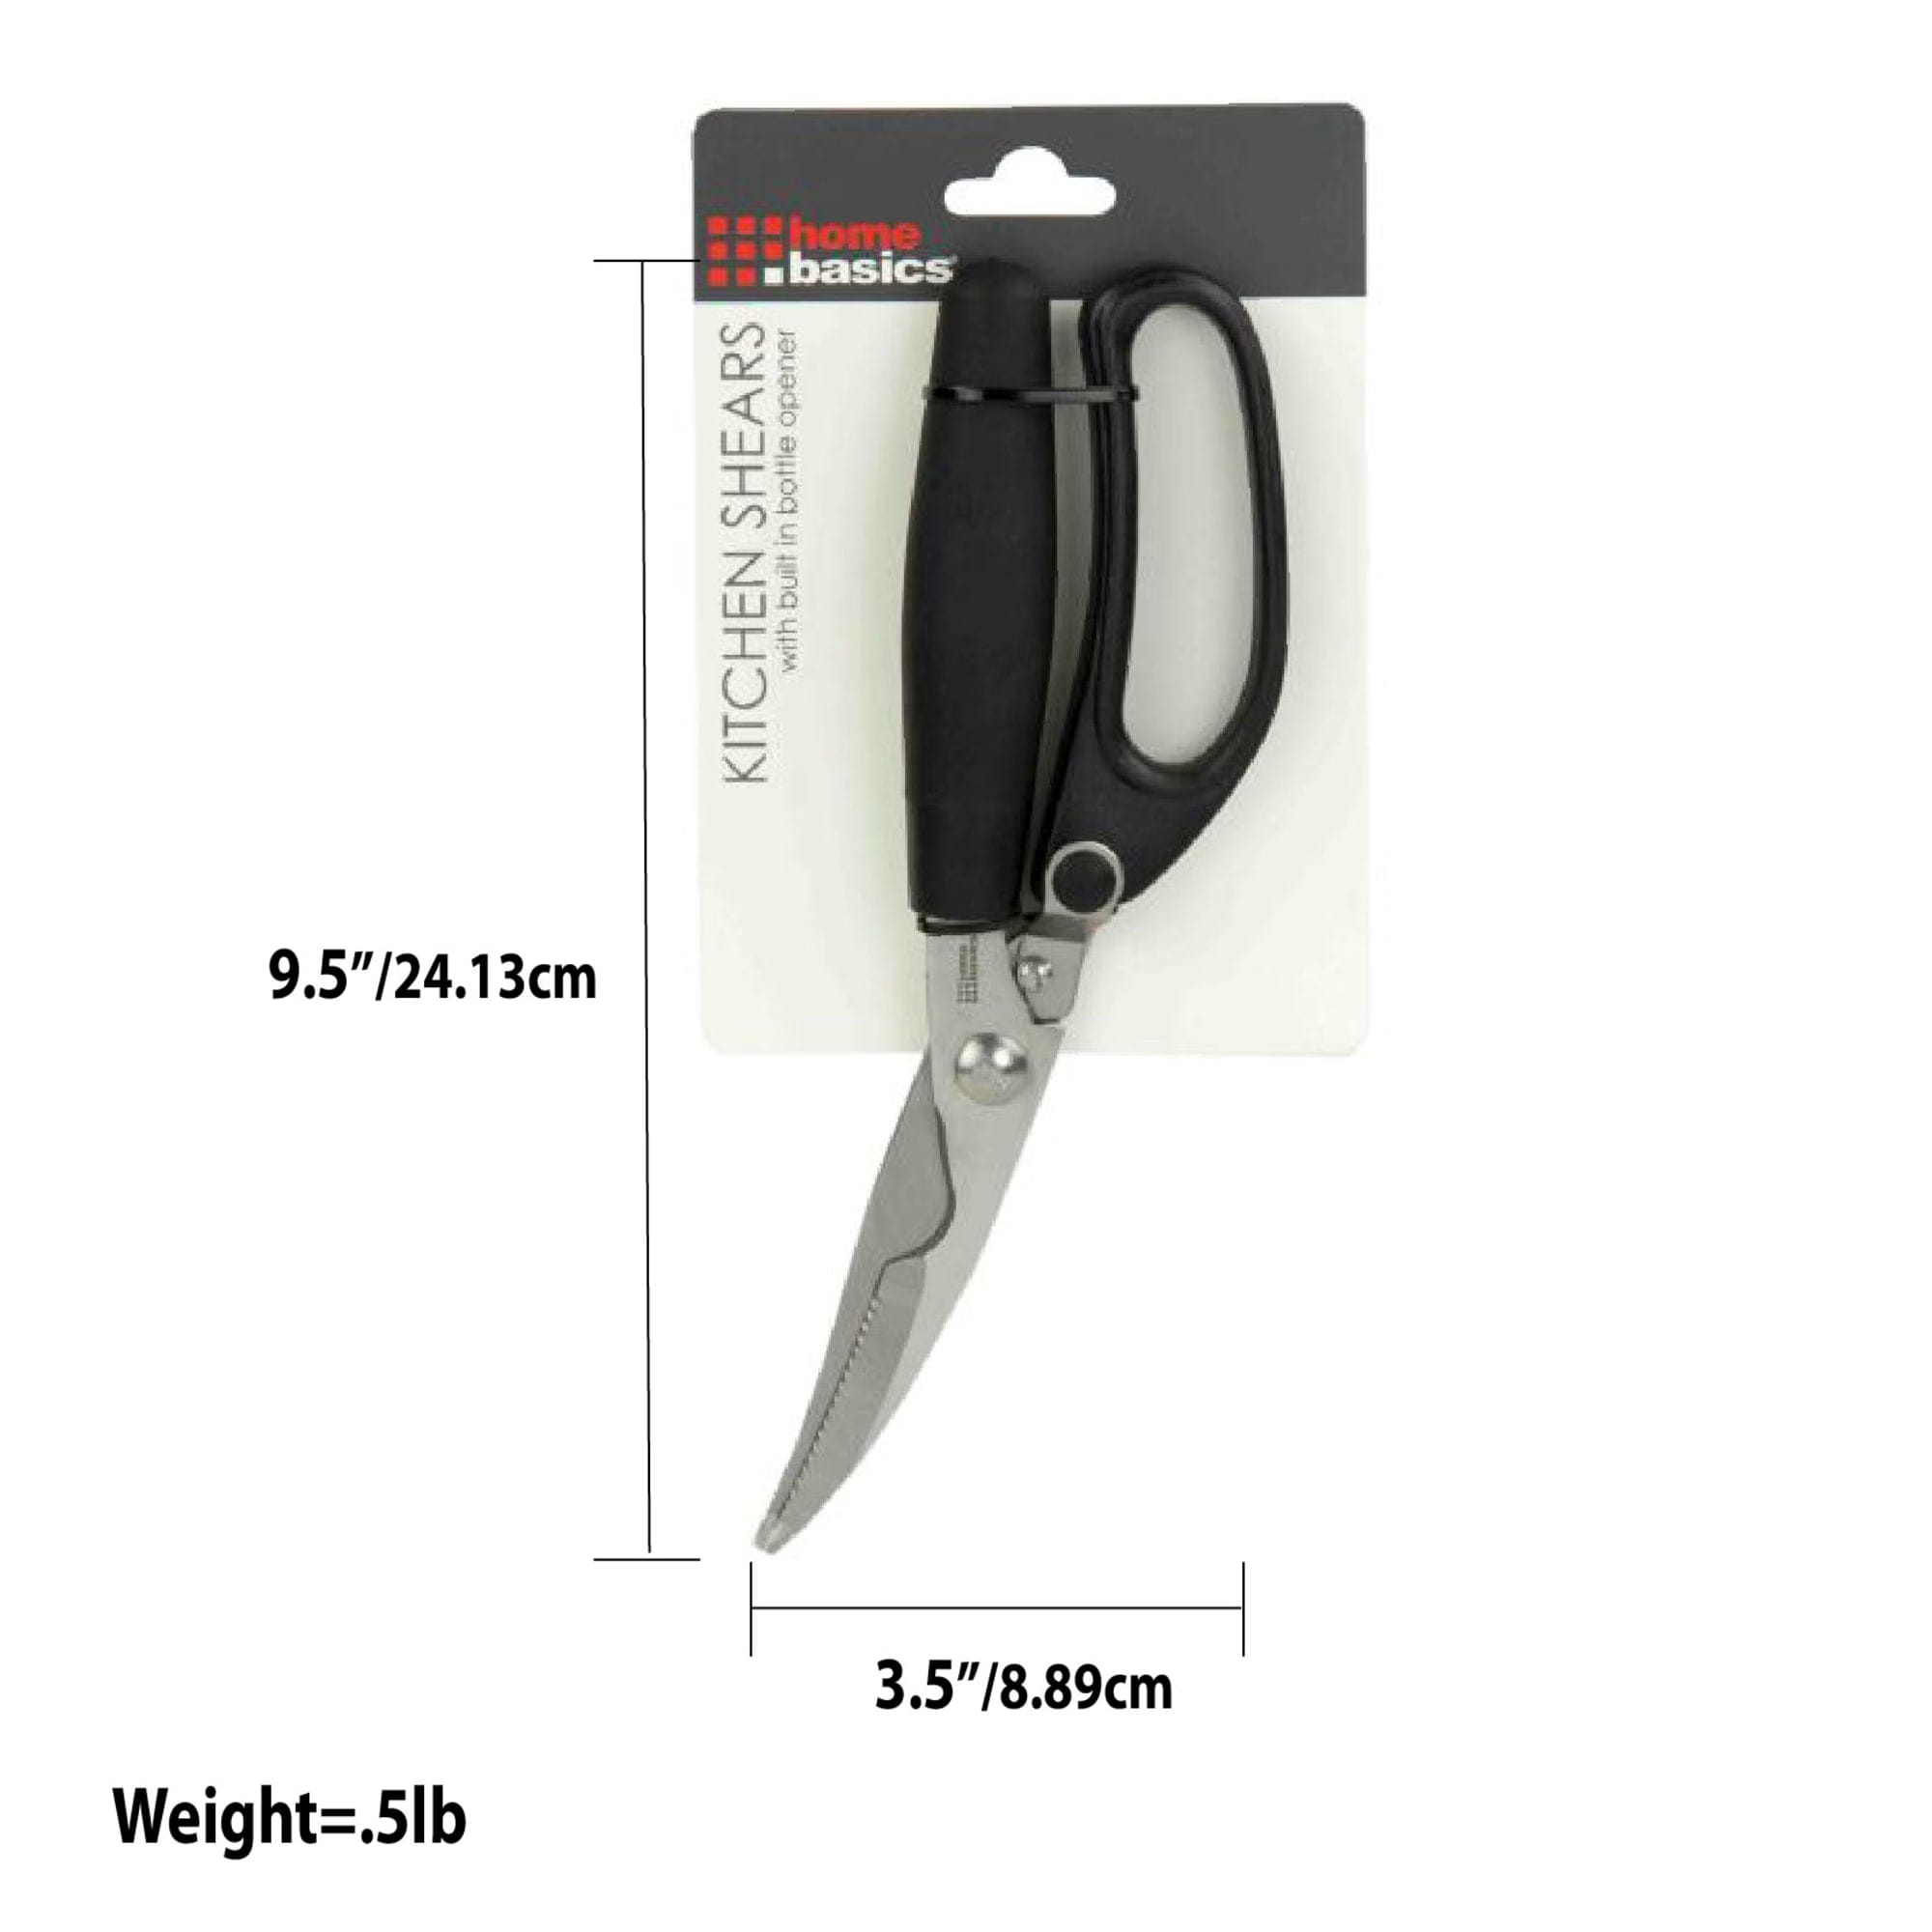 Home Basics Poultry Shears with Non-Slip TRP Coated Handles, Black $5.00 EACH, CASE PACK OF 24